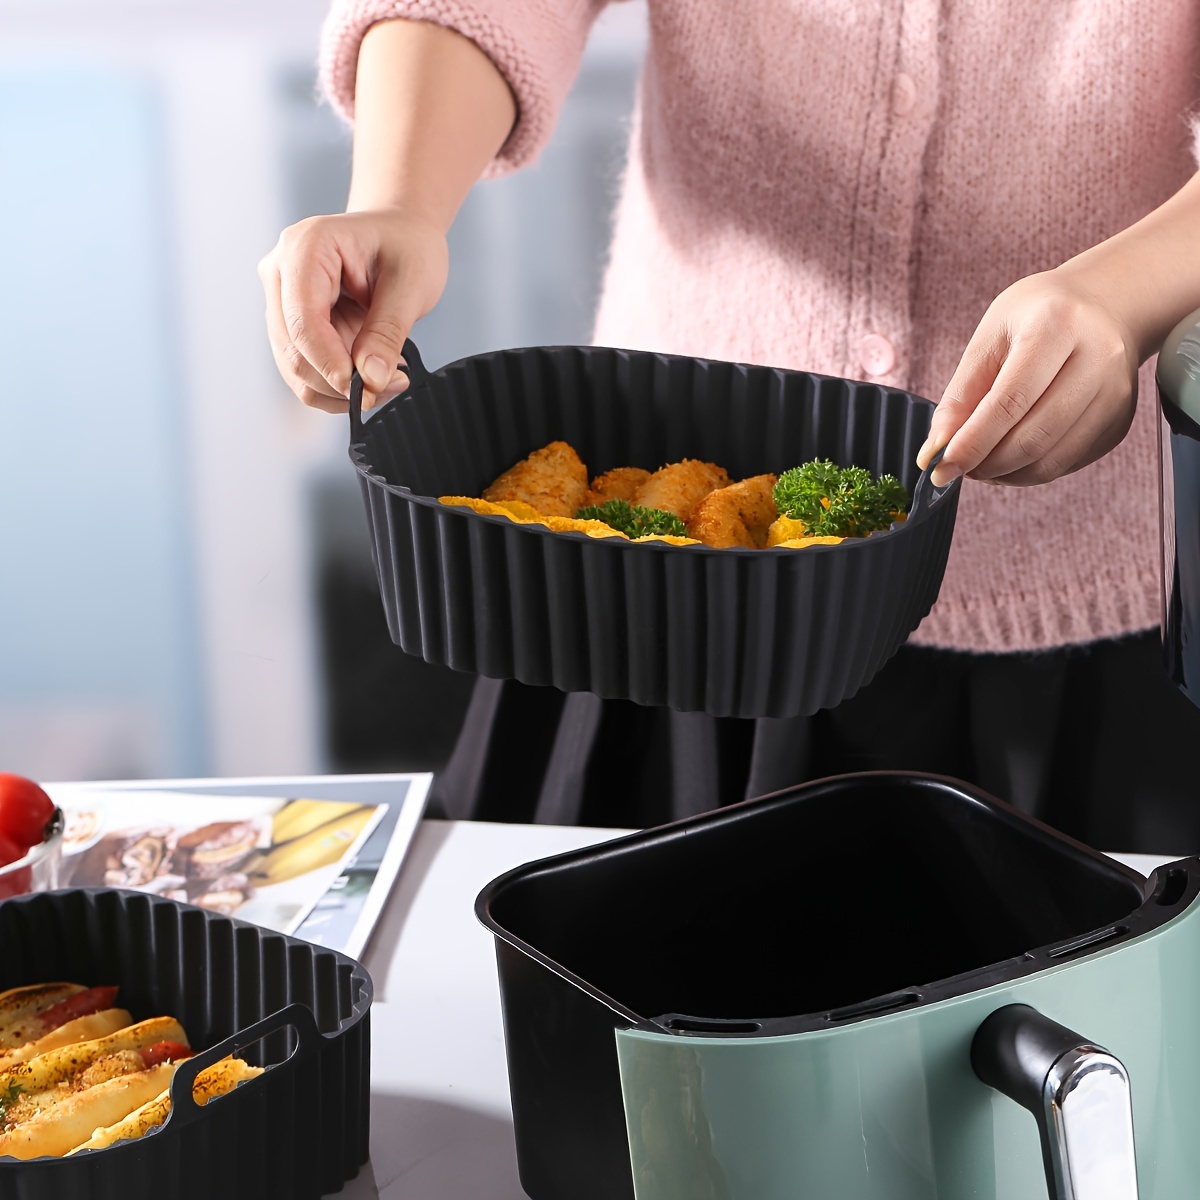 Rumbeast 3Pcs Silicone Air Fryer Liners, 8.27 inch Square Reusable